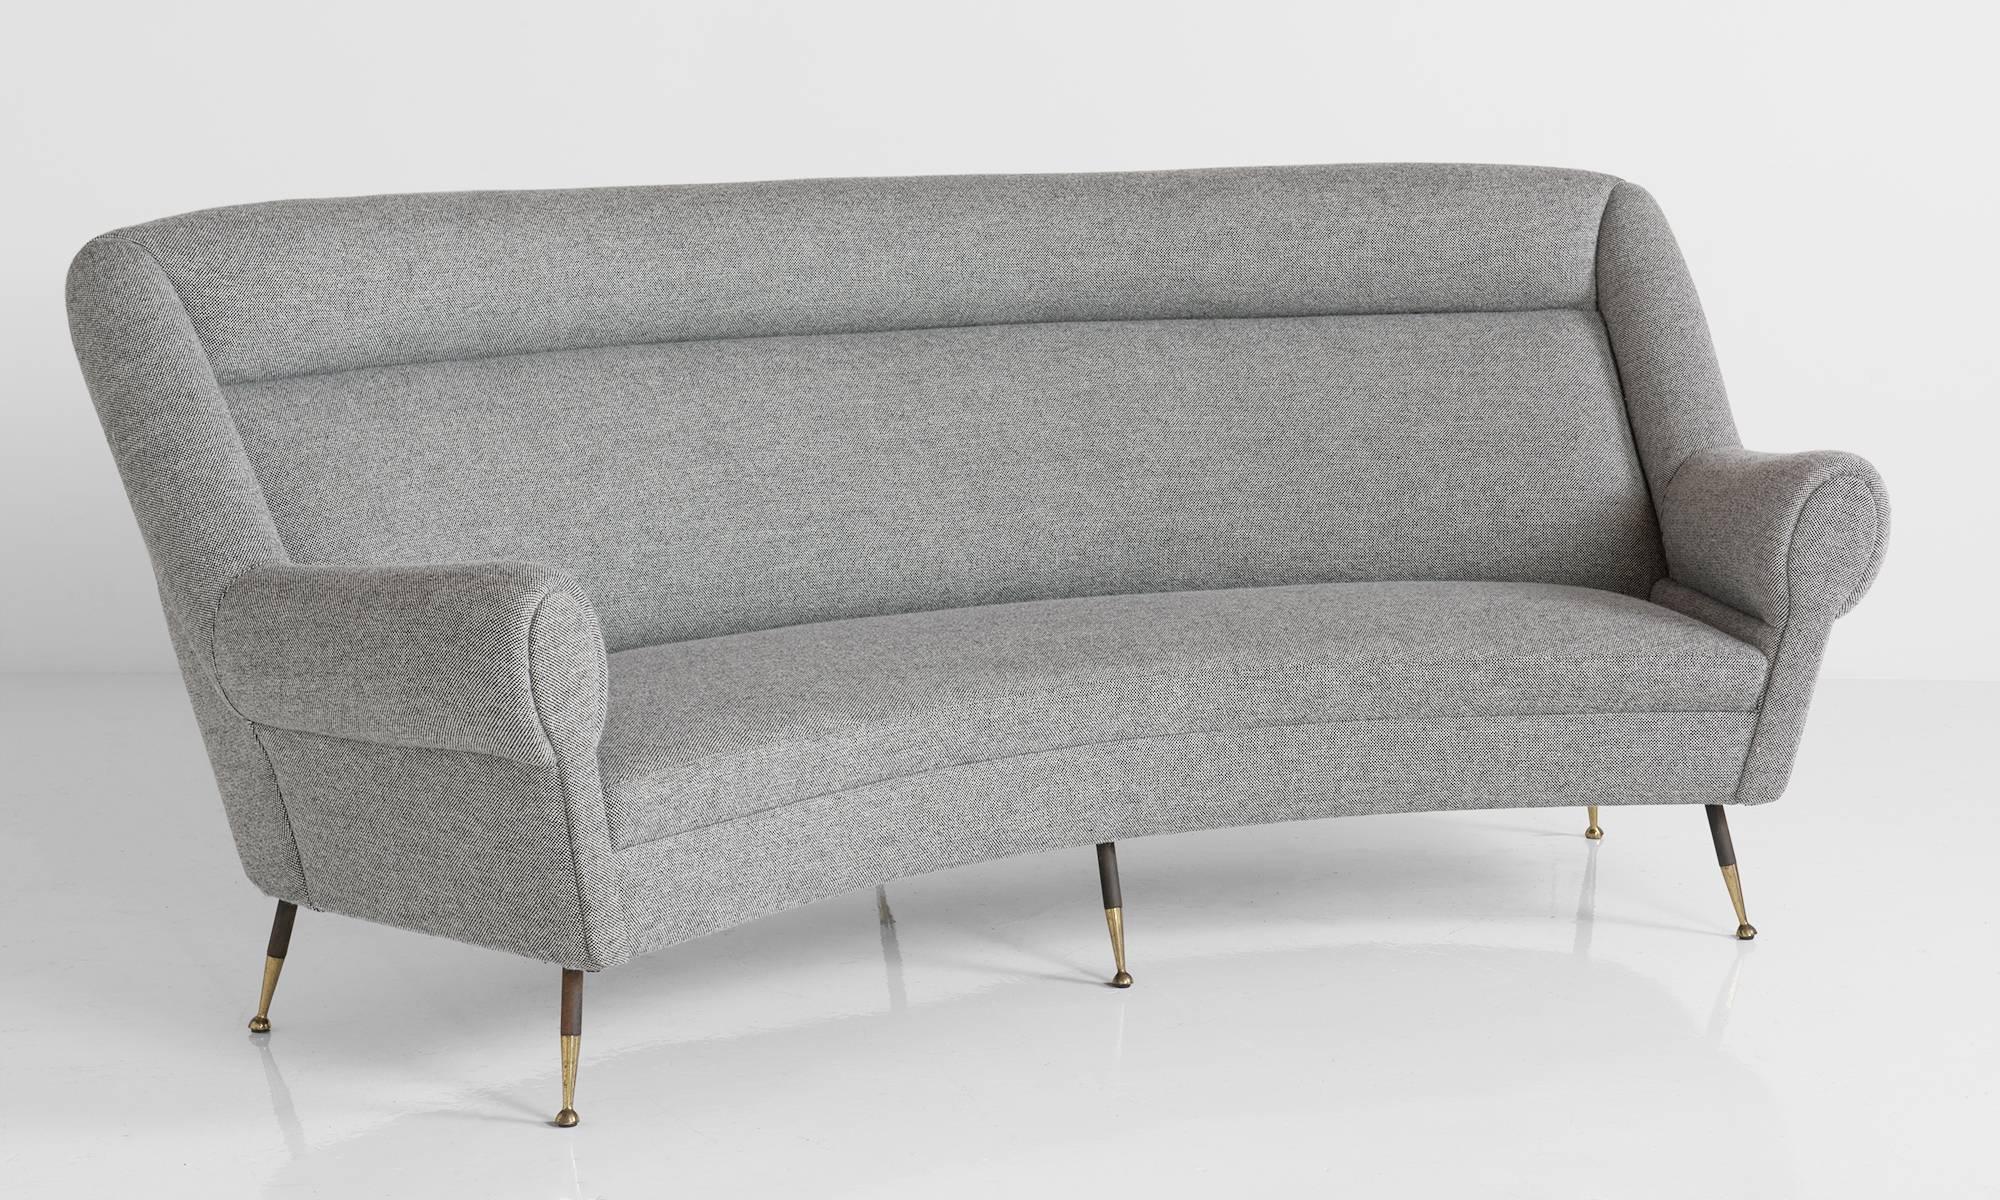 Wool and brass modern curved sofa, circa 1960.

With black metal and brass feet. Newly reupholstered in Maharam wool fabric.